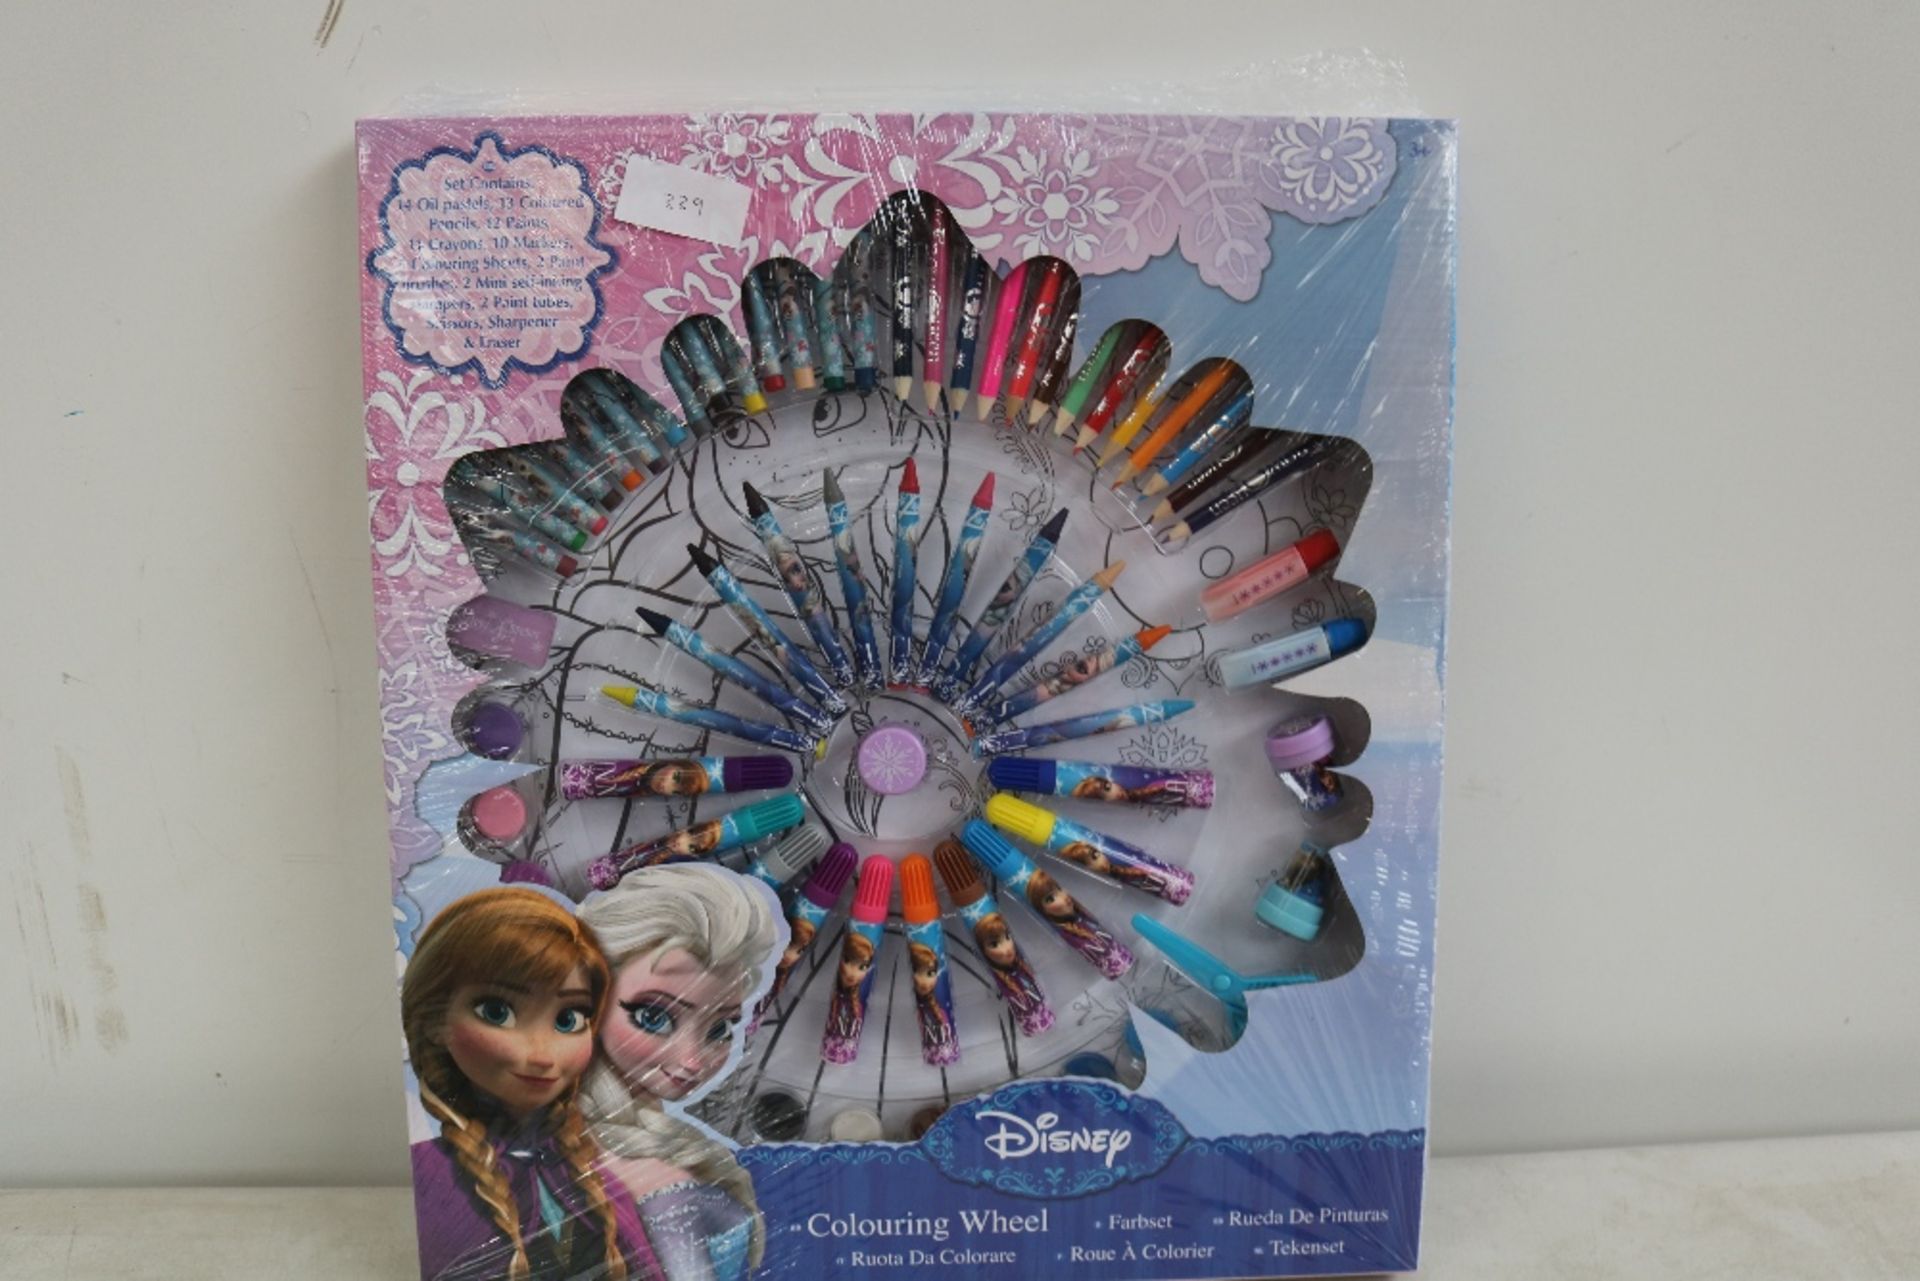 Disney Frozen colouring wheel, new and boxed.